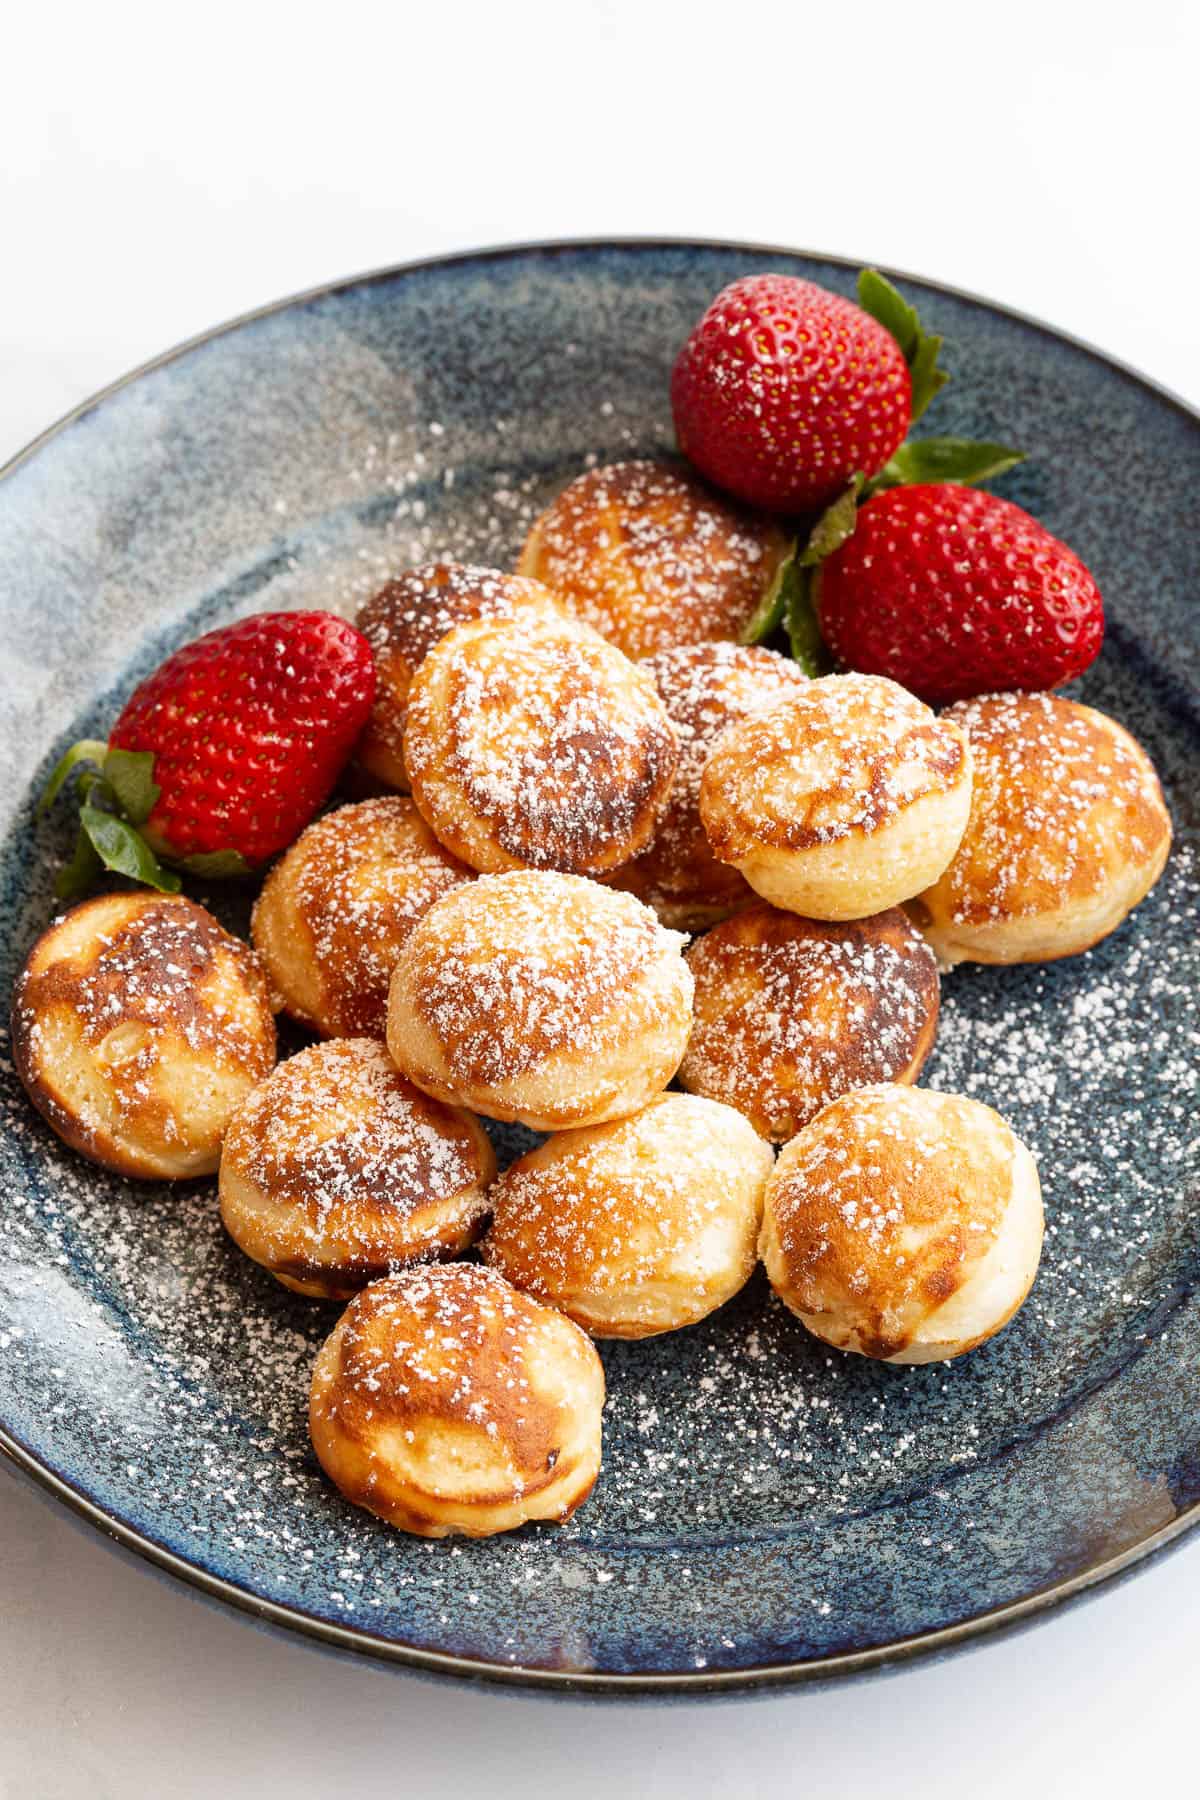 Plate of Dutch mini pancakes with strawberries and powdered sugar.